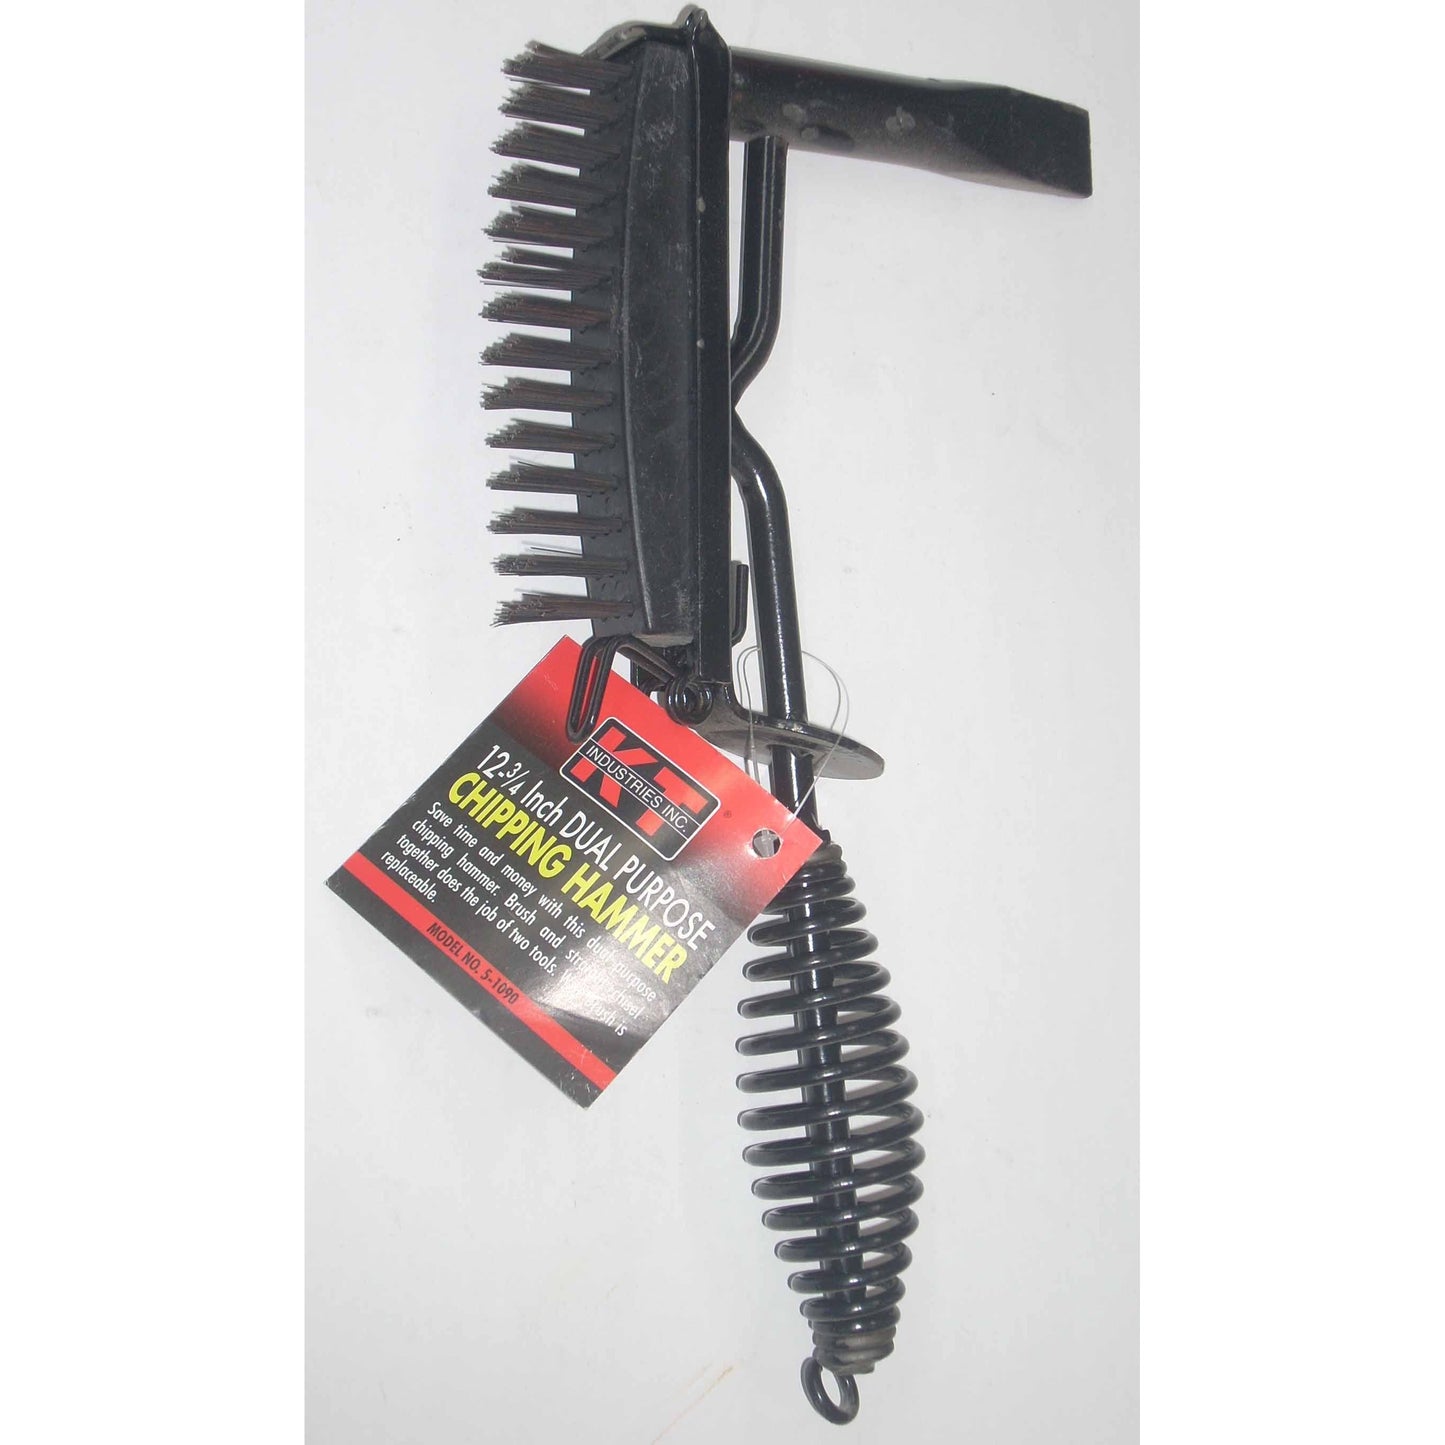 KT Industries 5-1090 Spring Handle Chipping Hammer with Wire Brush